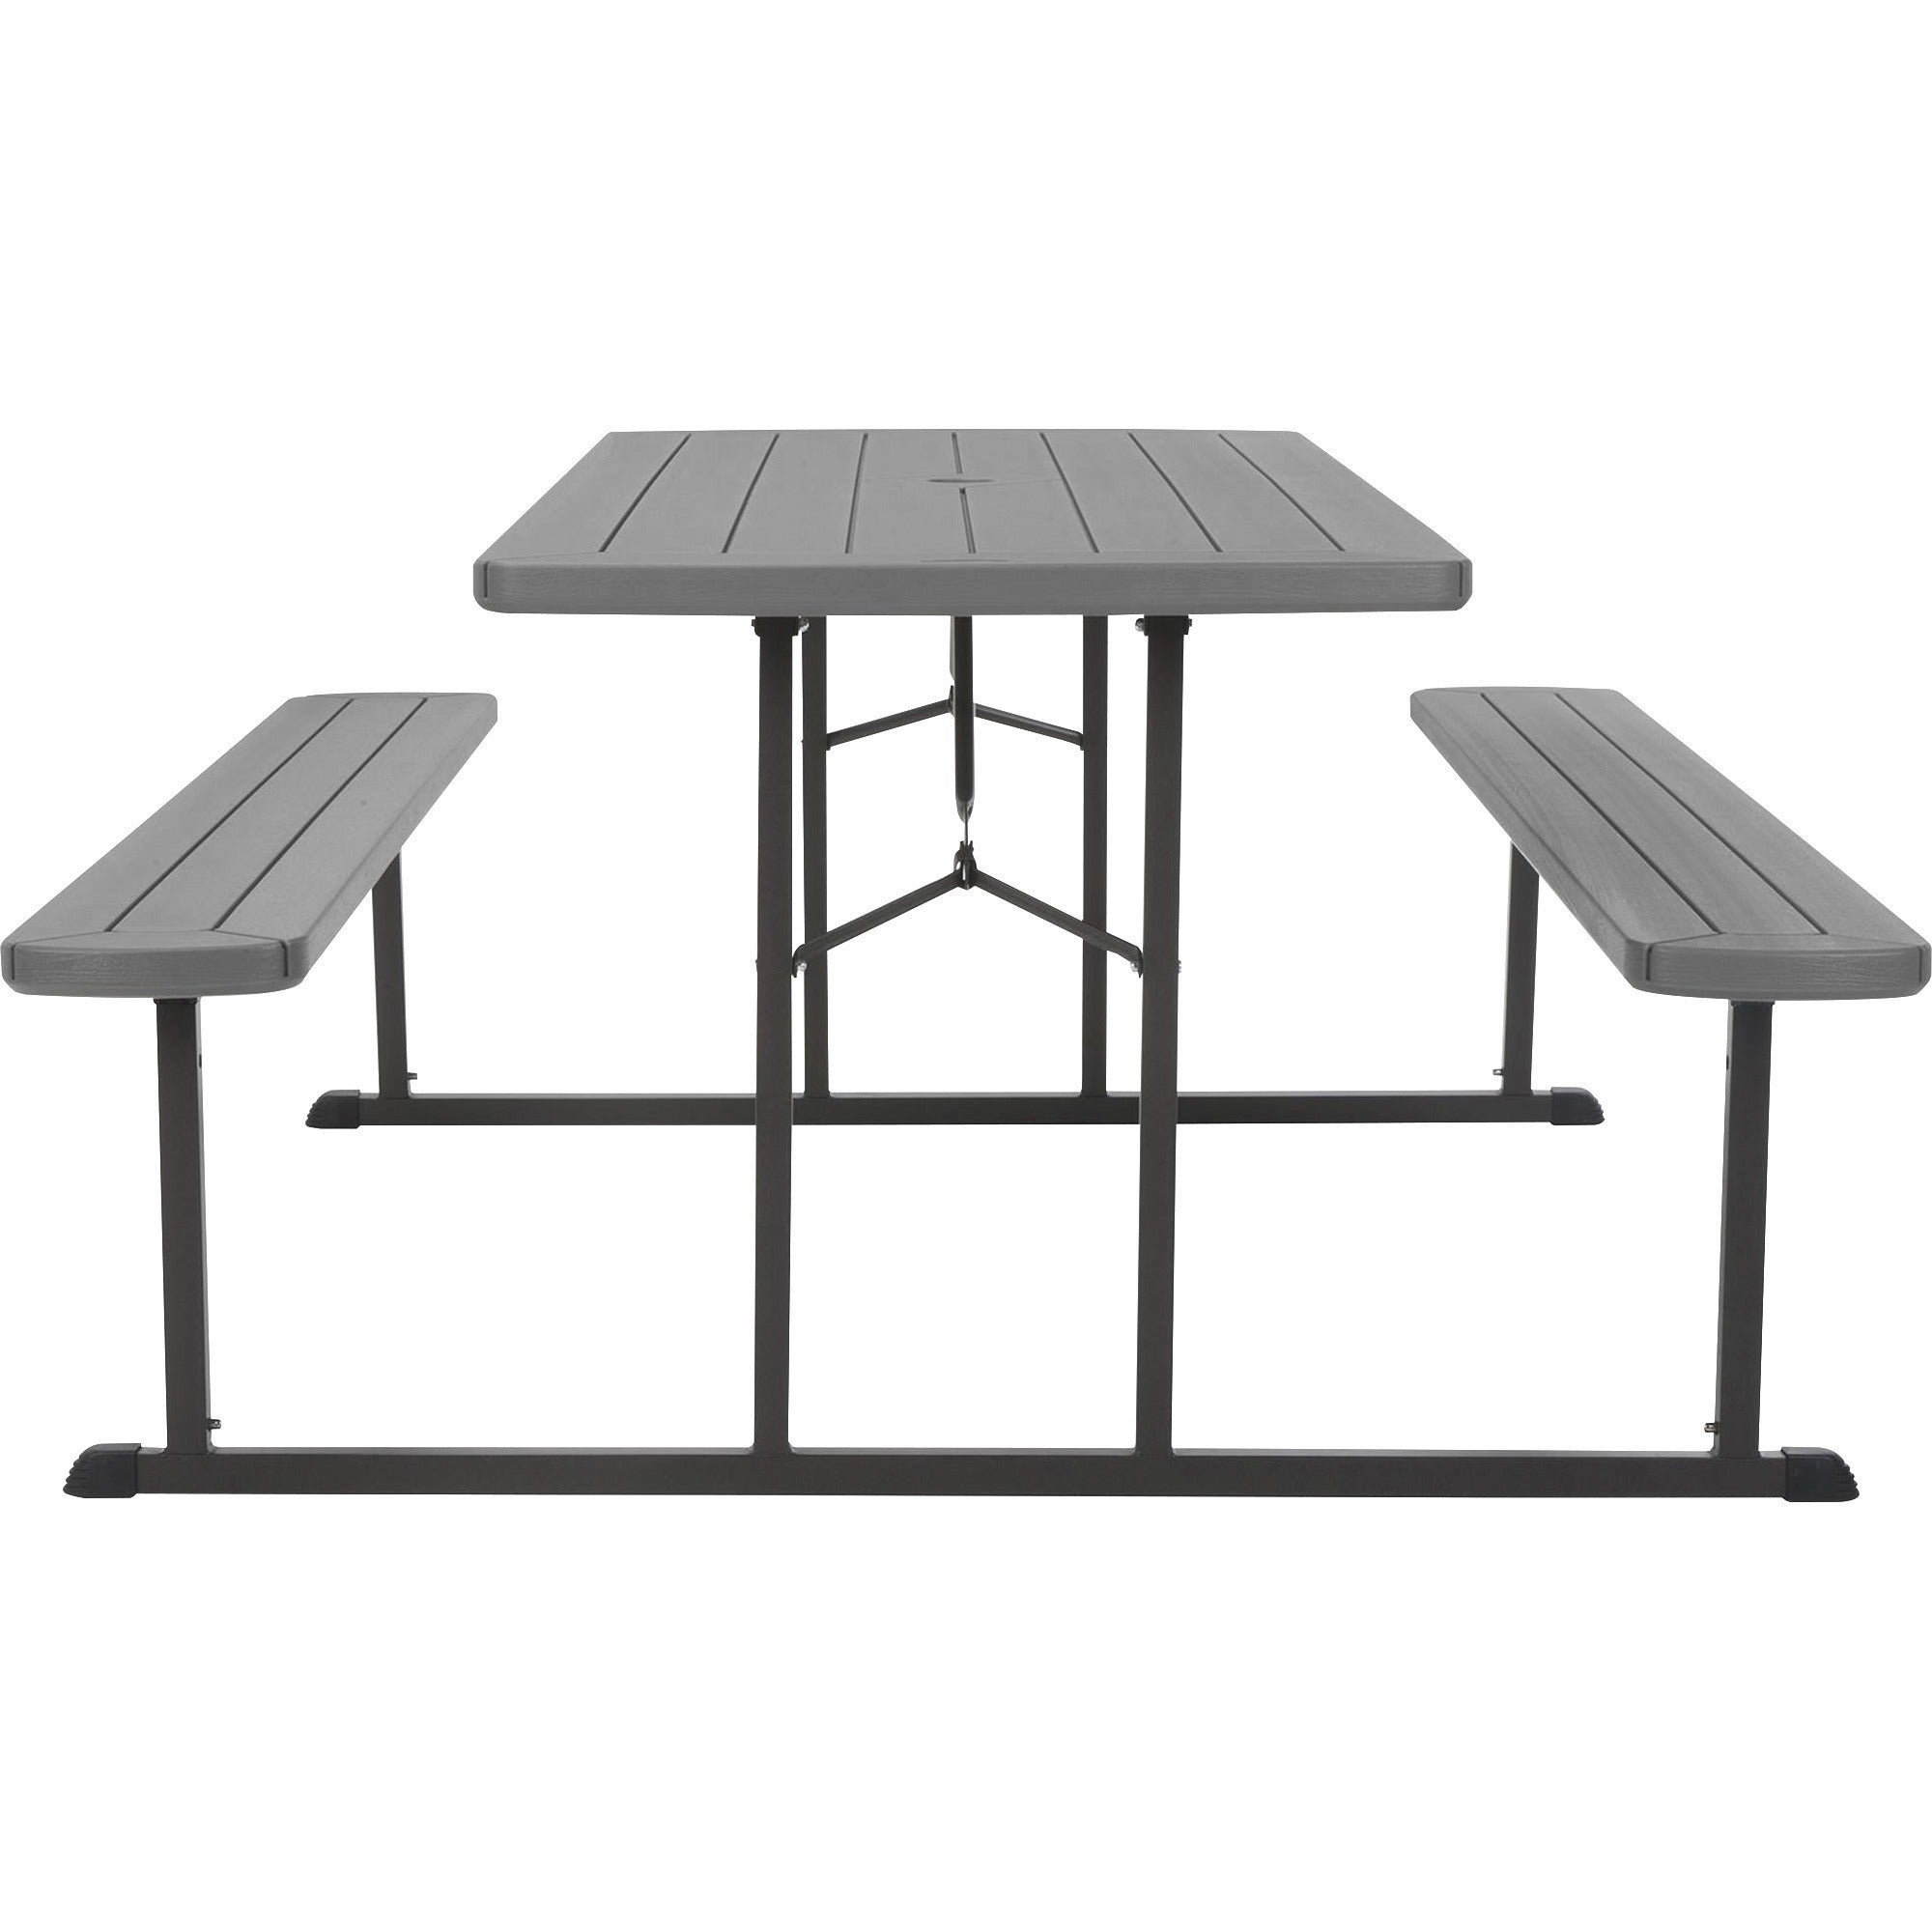 cosco-folding-picnic-table-for-table-toptaupe-top-800-lb-capacity-x-72-table-top-width-x-57-table-top-depth-29-height-wood-grain-resin-top-material-1-each_csc87902dgr1e - 2